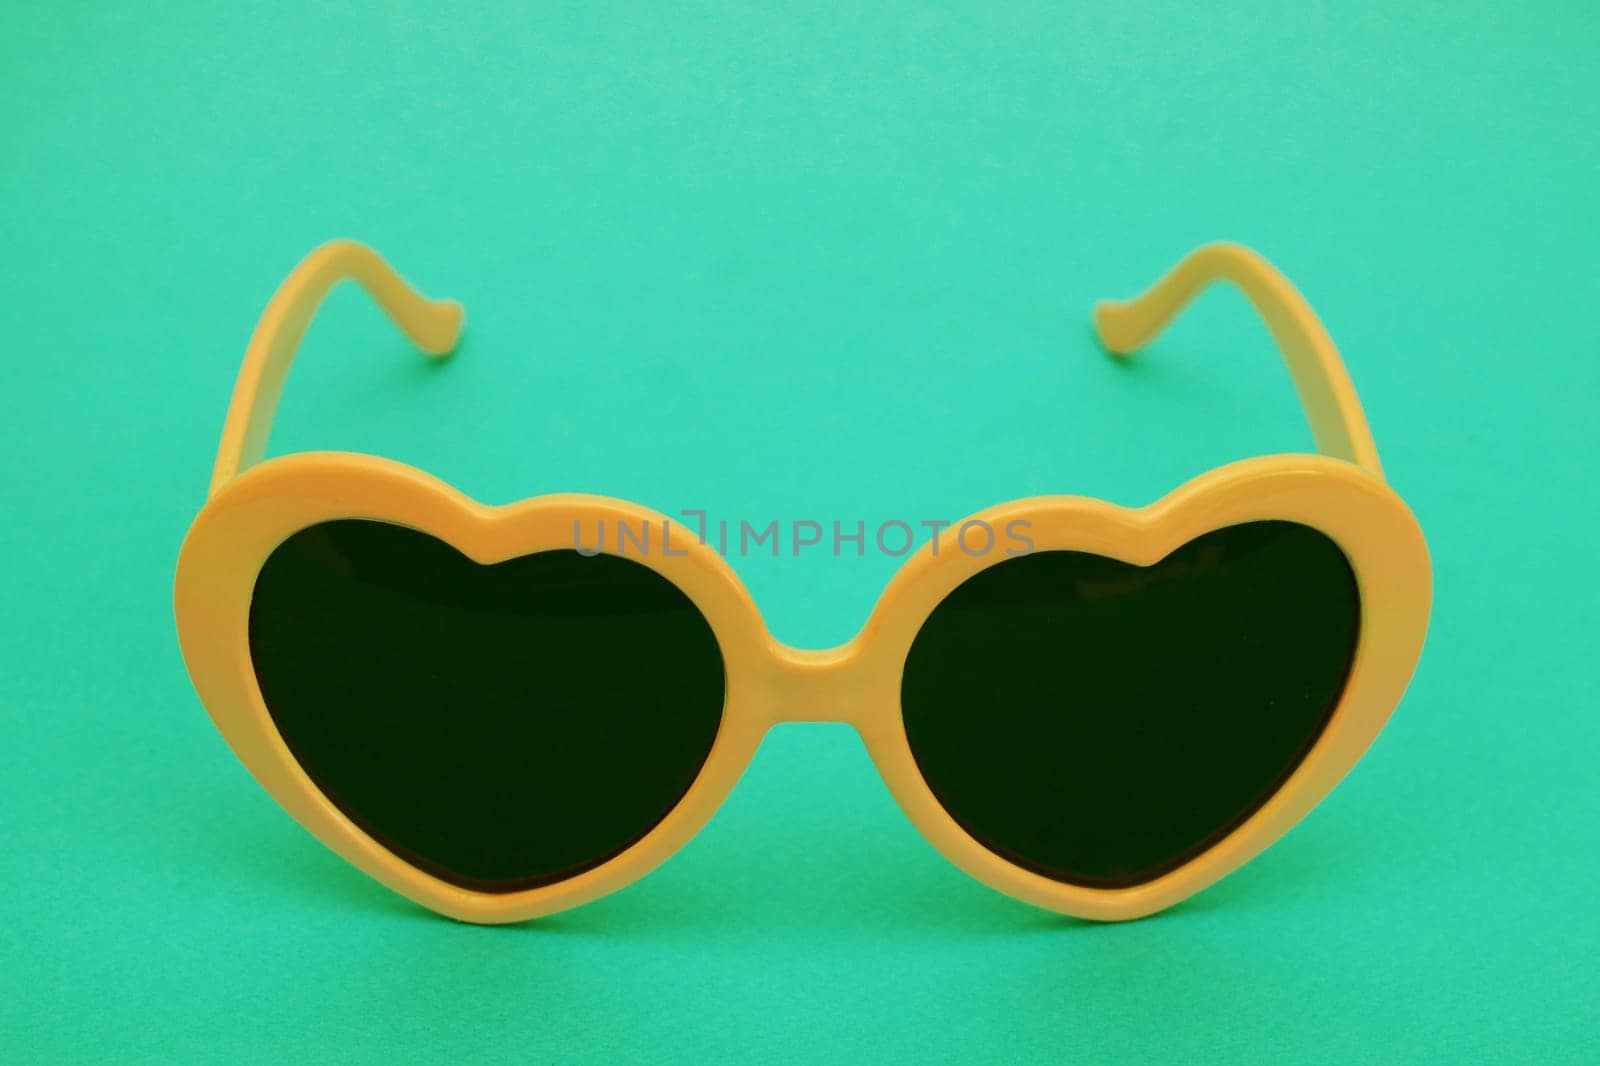 Sunglasses with an orange frame on a green paper background. by gelog67